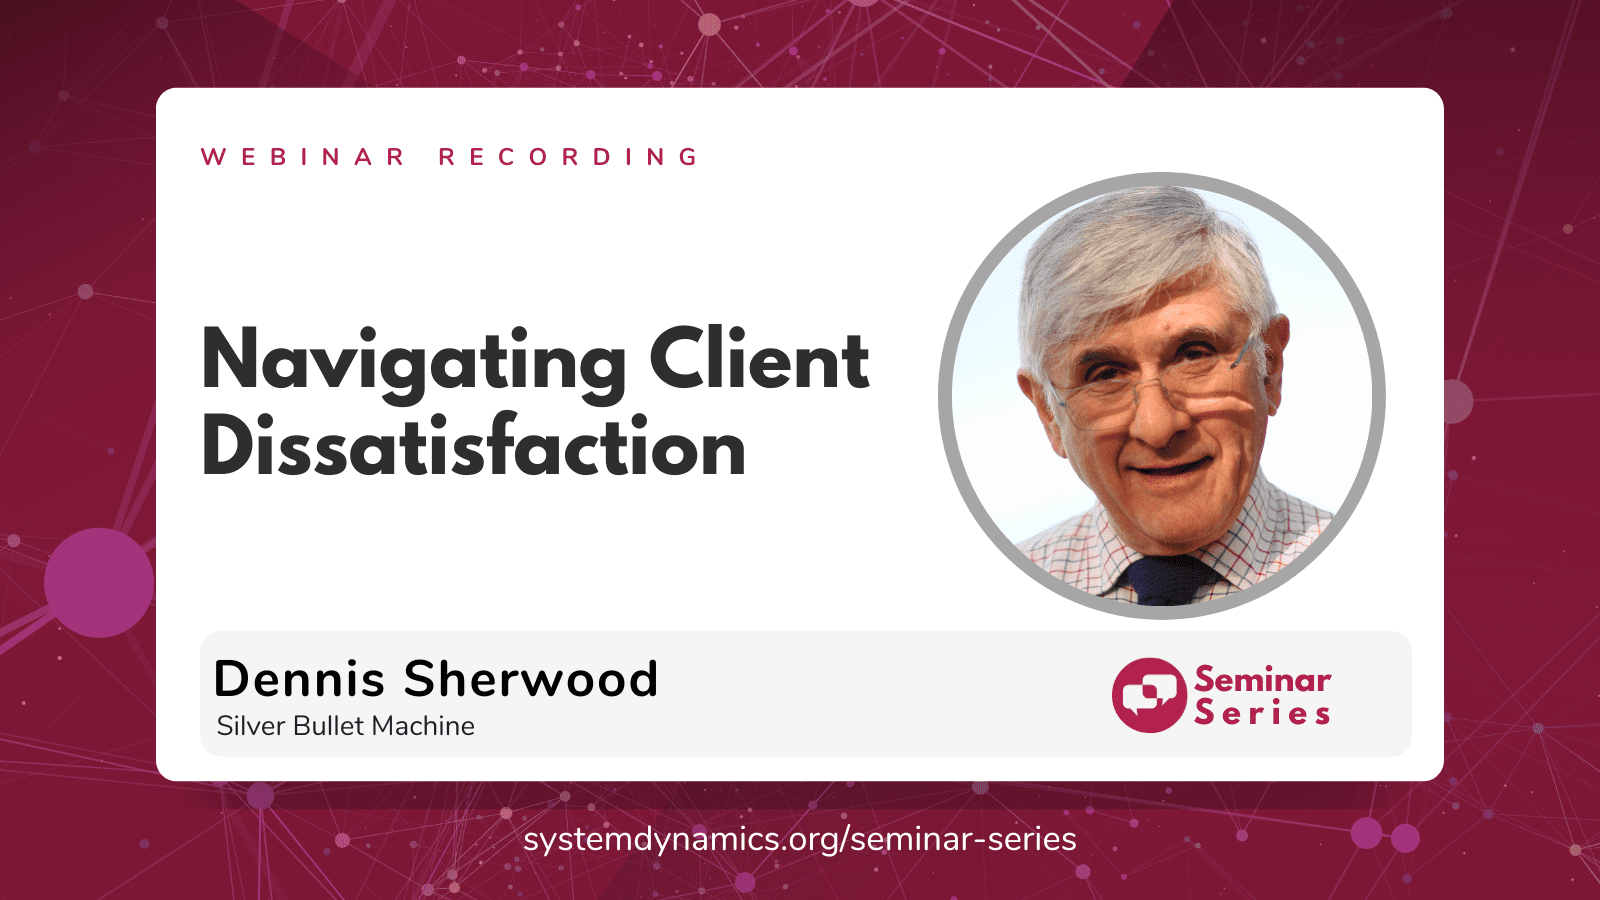 Webinar Highlights and Recording: Navigating Client Dissatisfaction